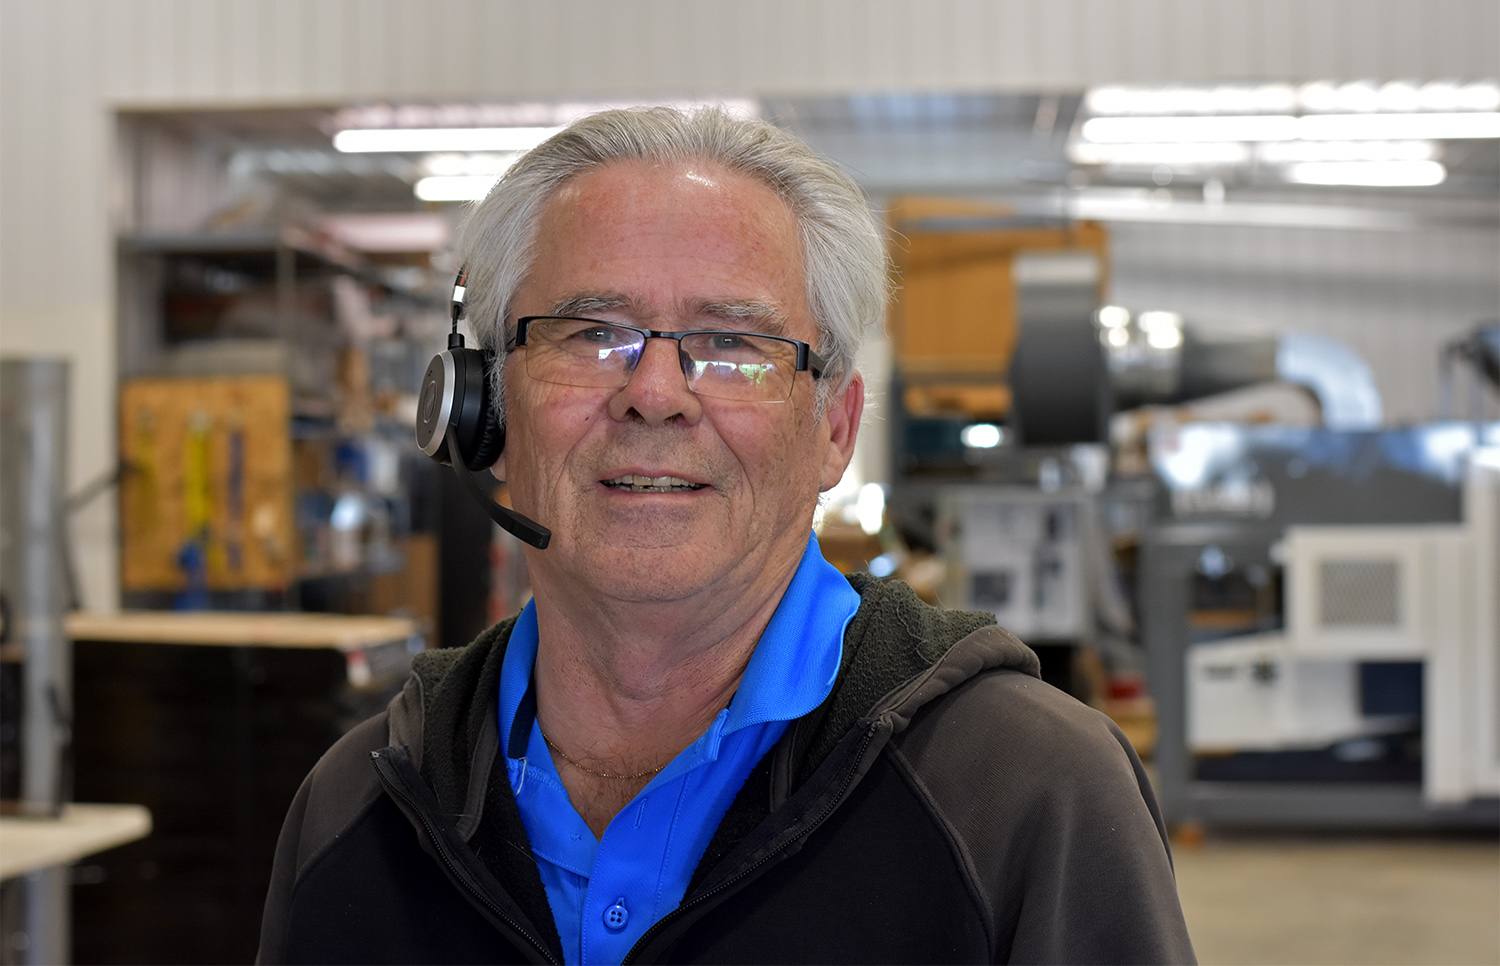 Roy Ritchie, Shop Manager & Grain Systems Analyst